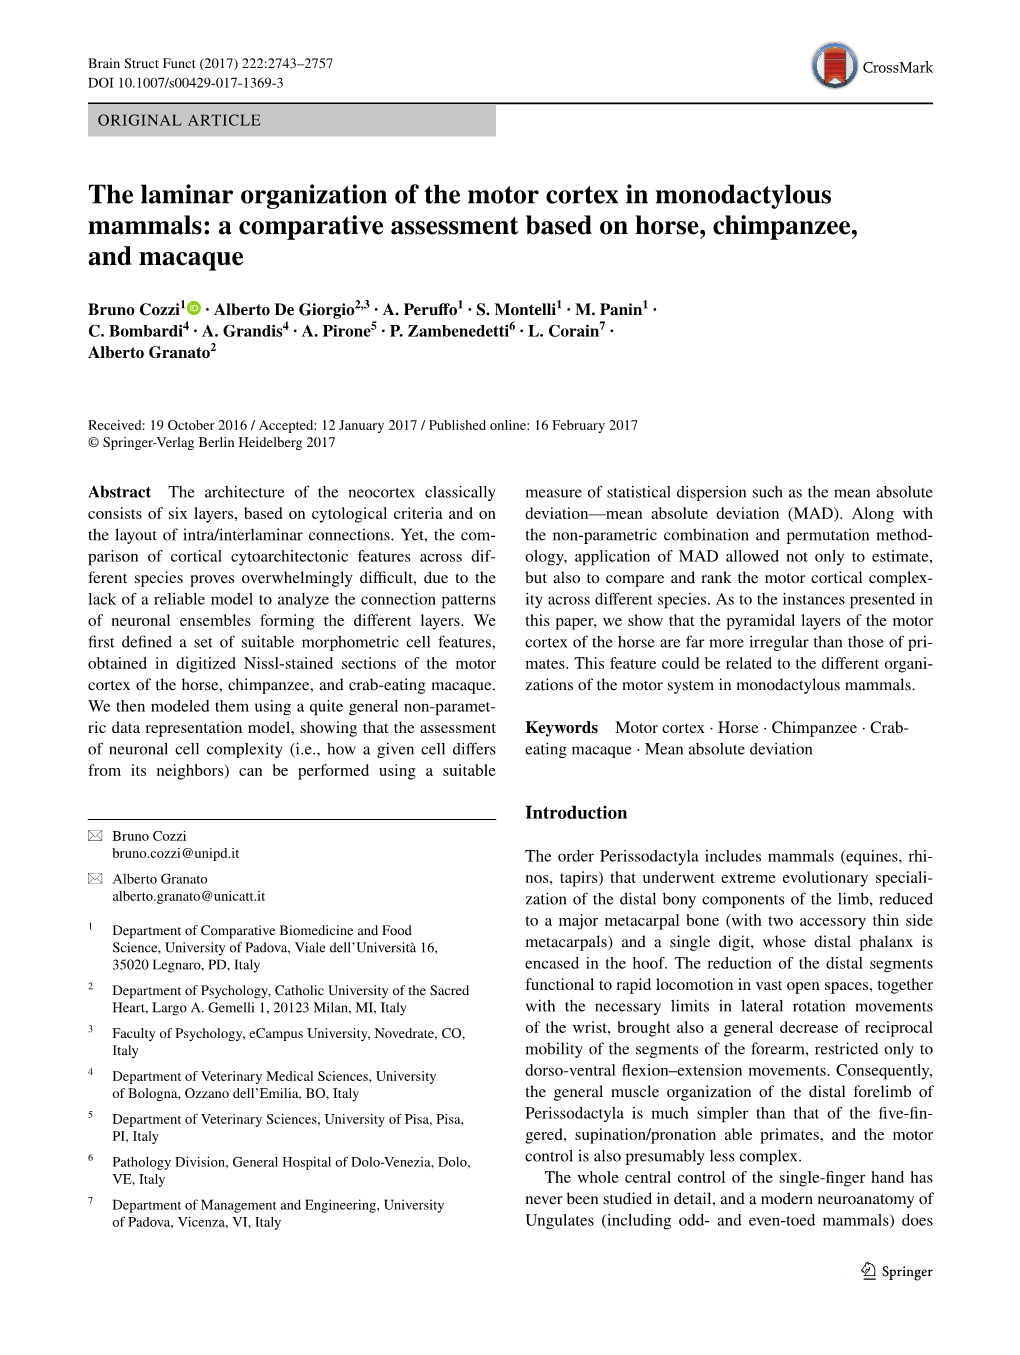 The Laminar Organization of the Motor Cortex in Monodactylous Mammals: a Comparative Assessment Based on Horse, Chimpanzee, and Macaque